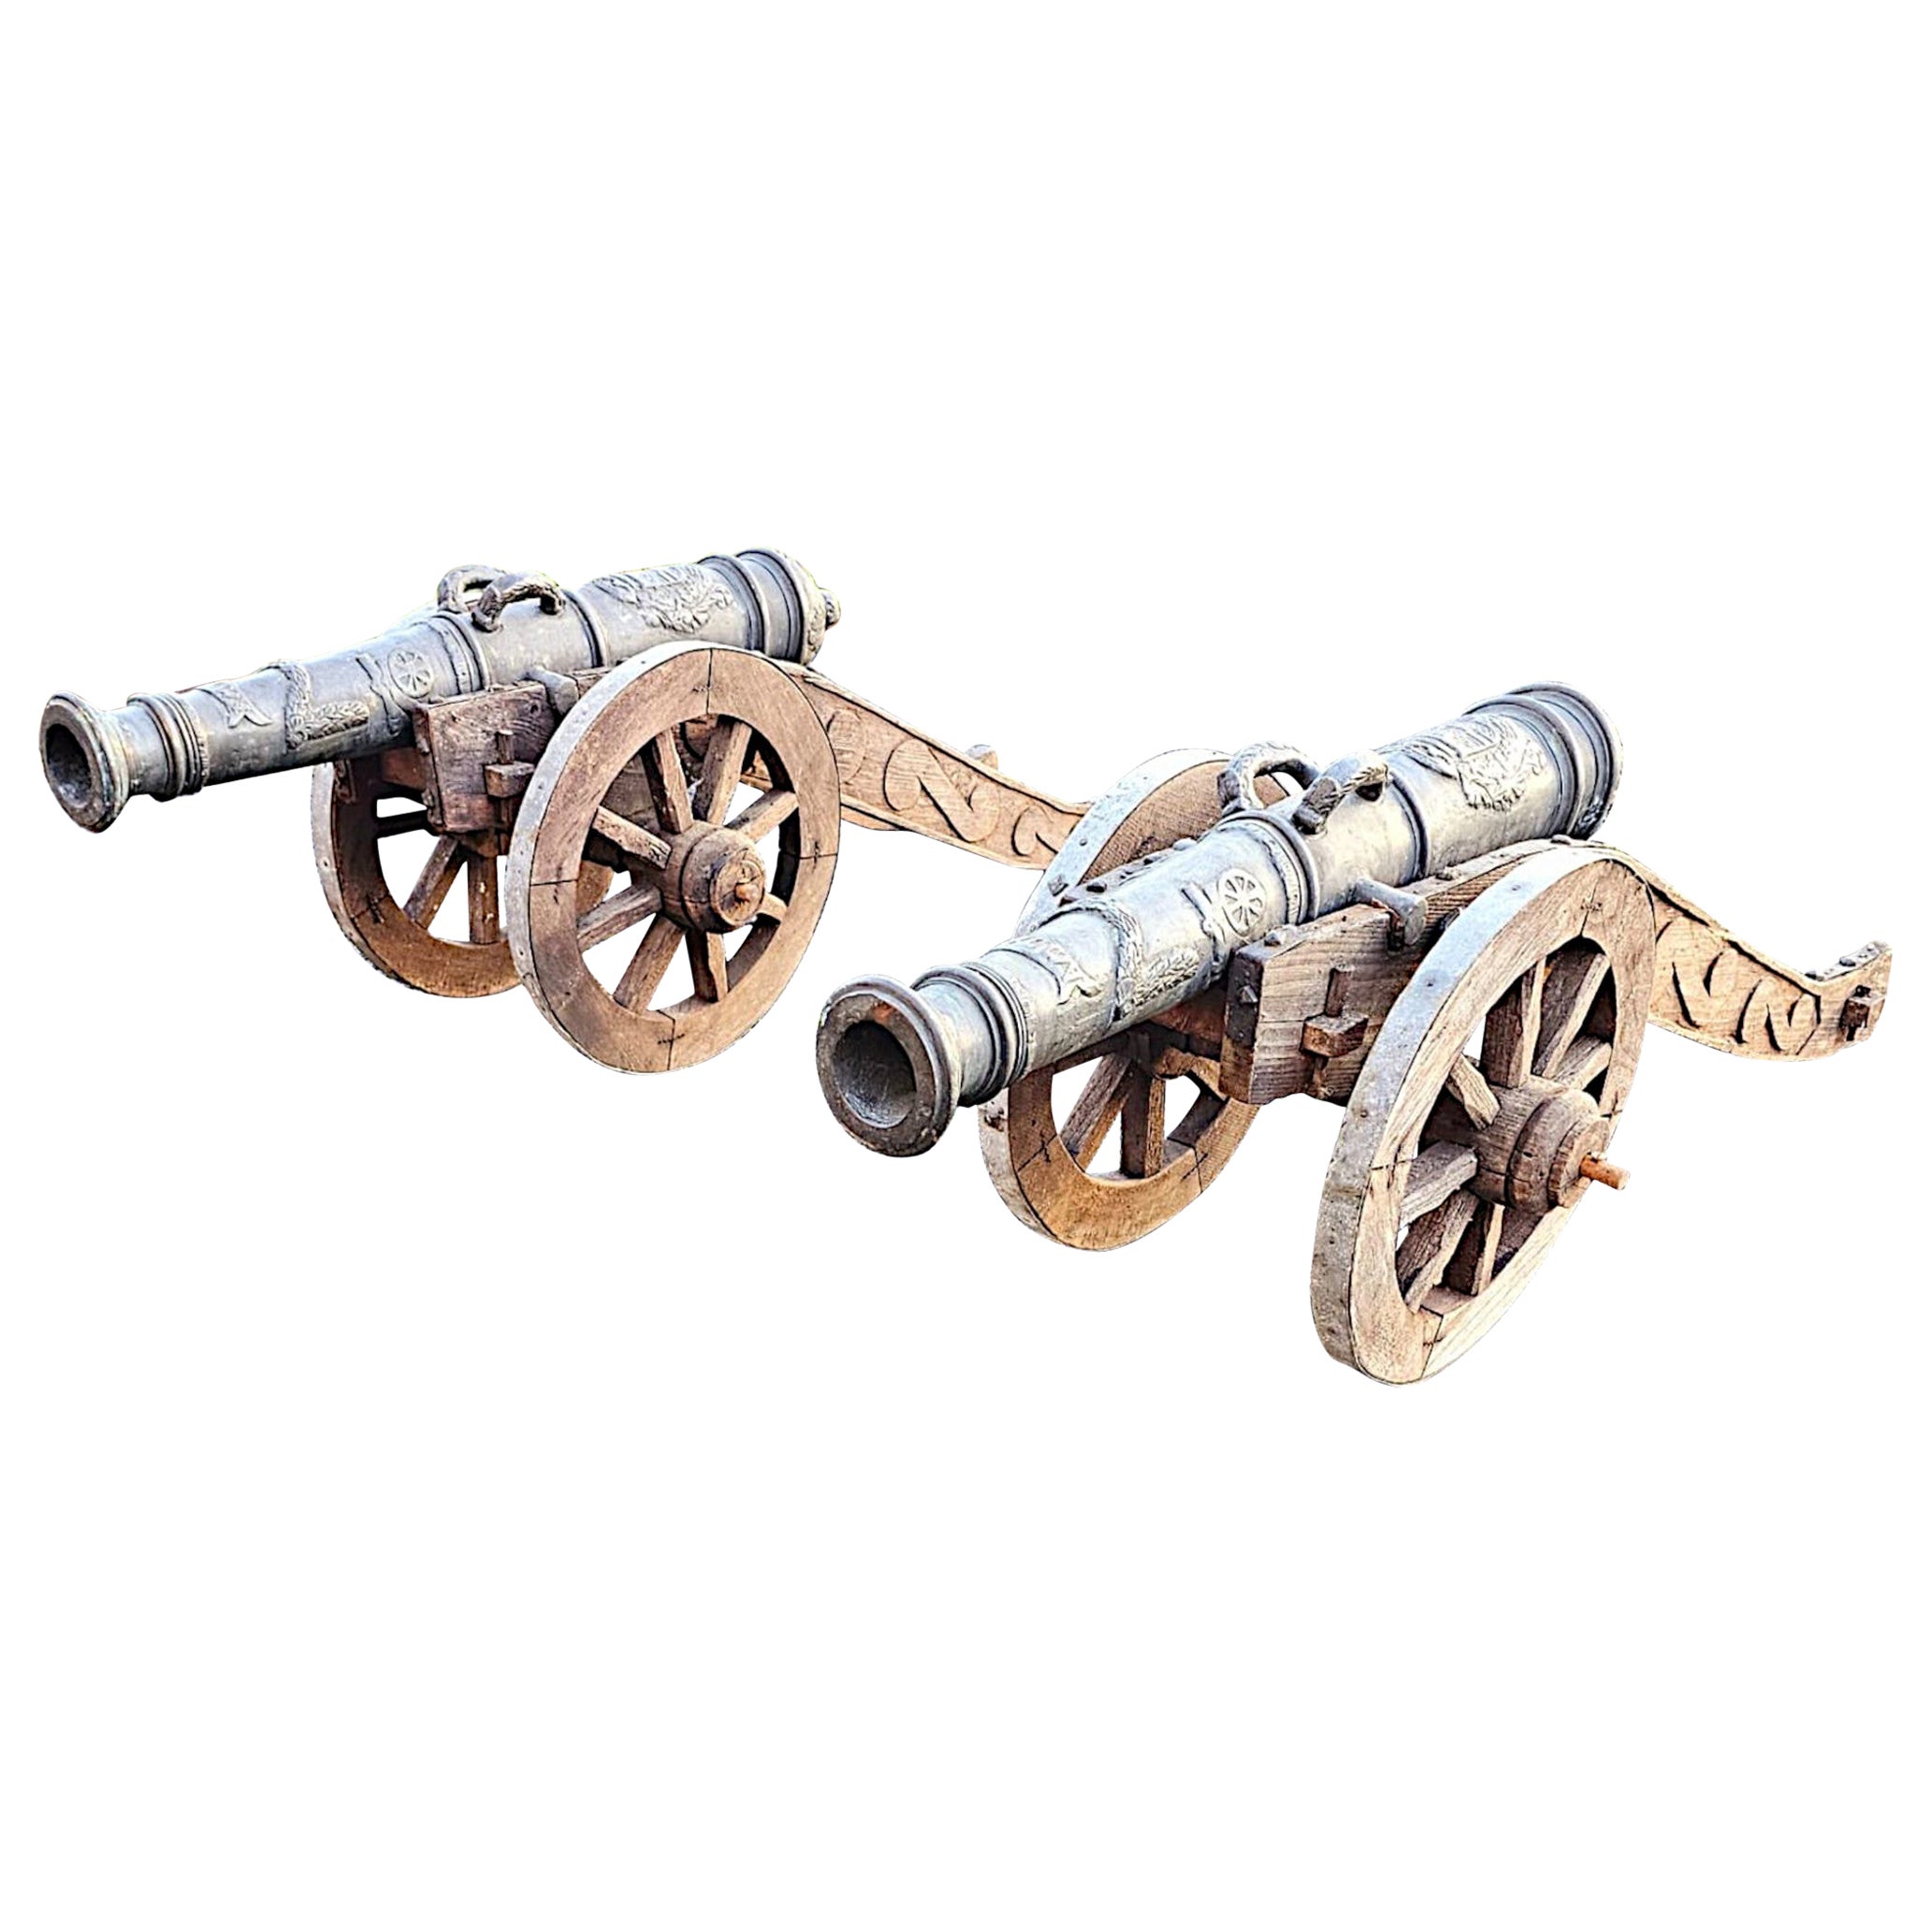 A  Rare Pair of 19th Century Bronze Barrelled Signal Cannons on Timber Base For Sale